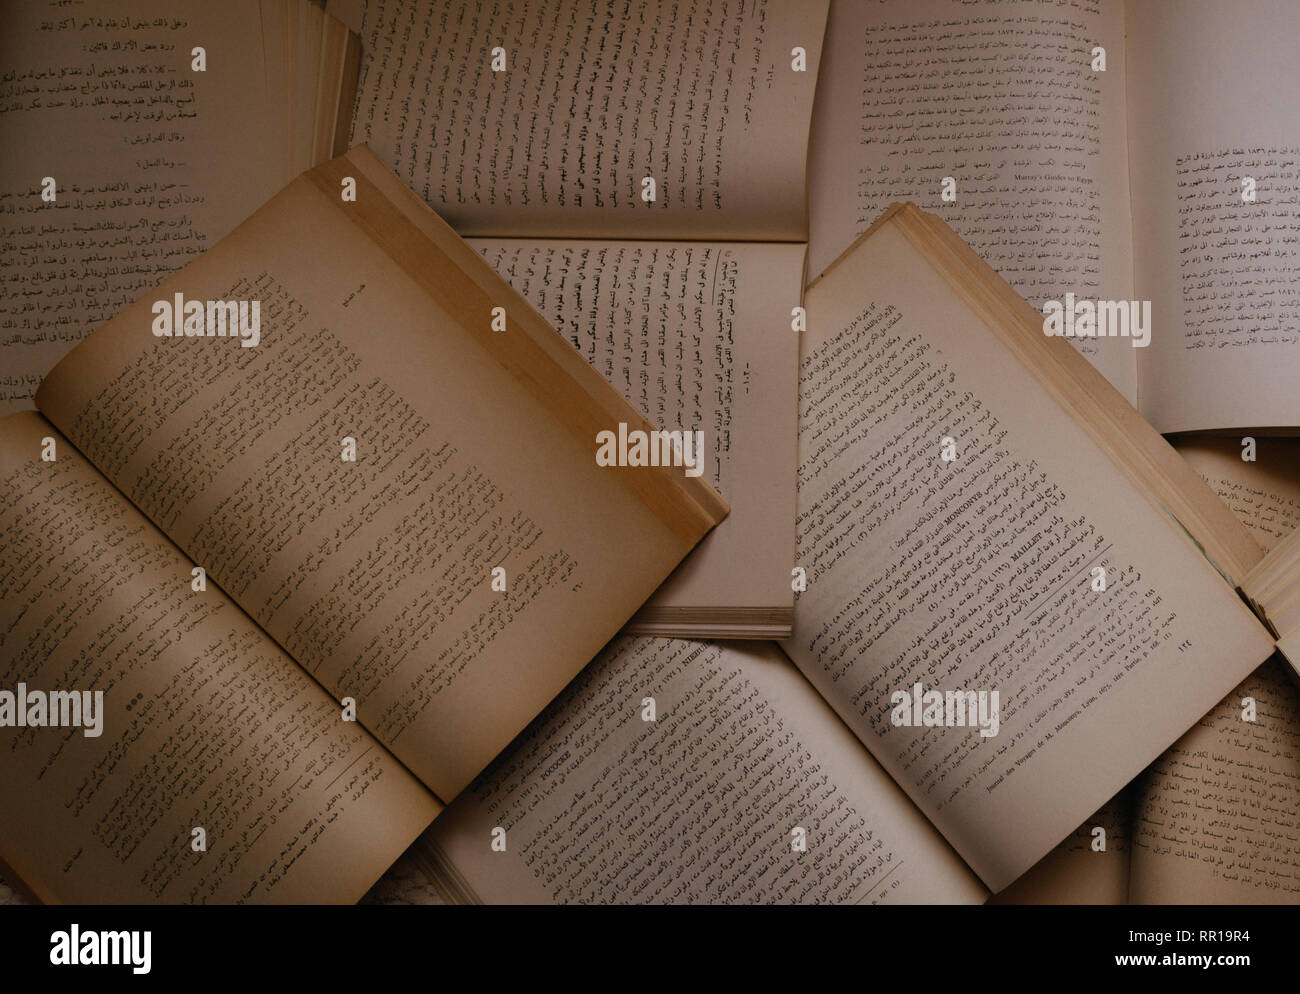 Old open books with text Stock Photo